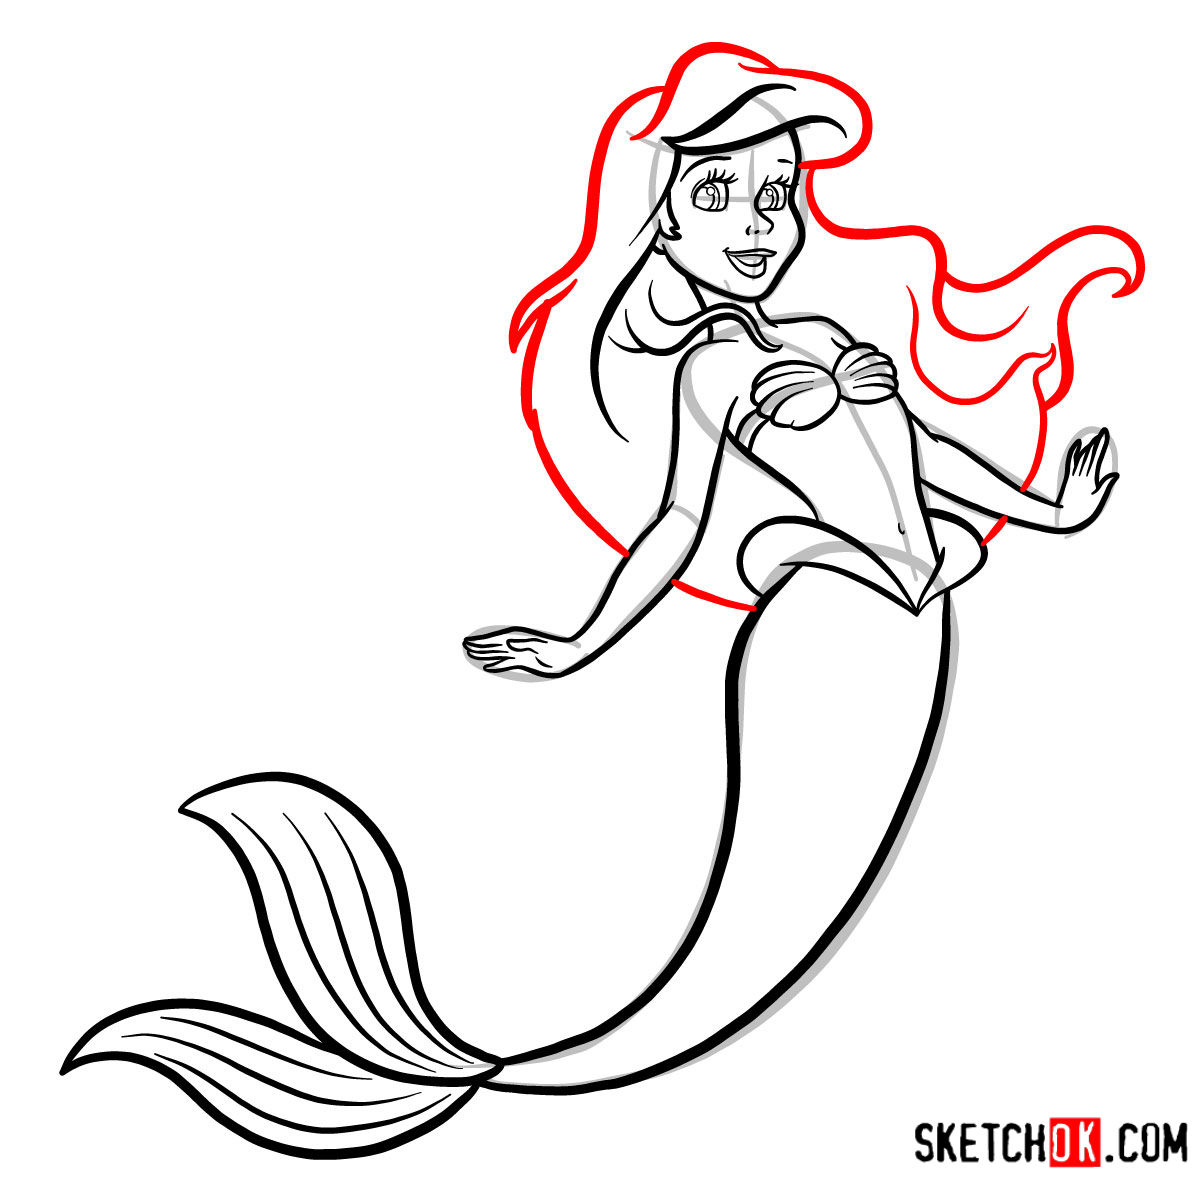 How to draw cute Ariel | The Little Mermaid - step 10